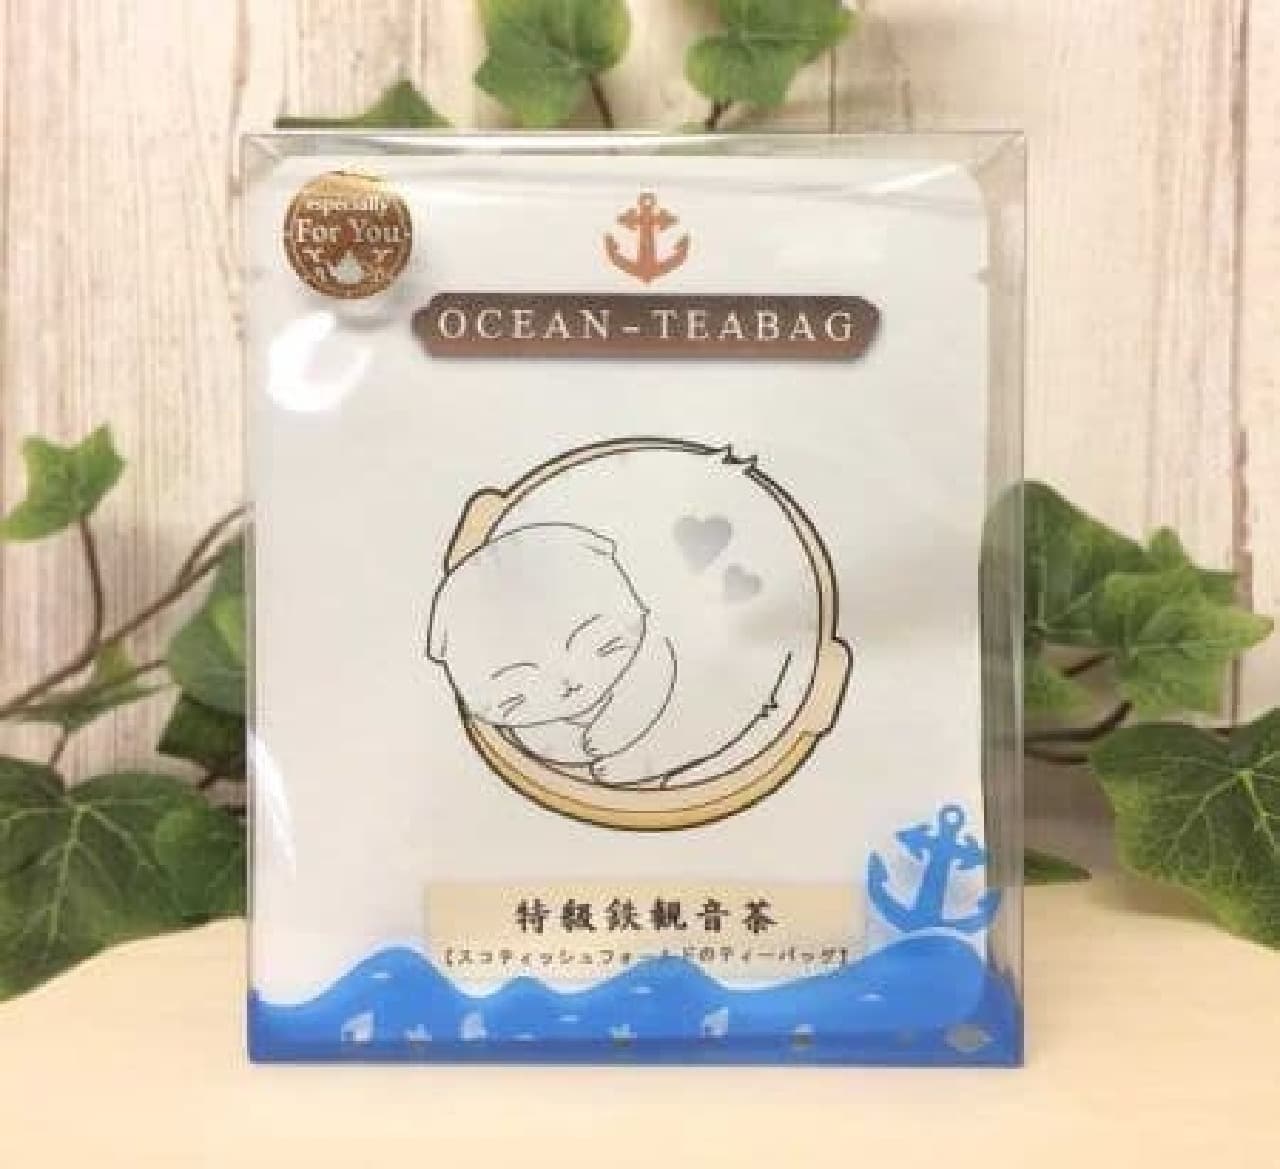 "Scottish Fold Tea Bag (Special Grade Tieguanyin)" is a tea bag designed with Scottish Fold to sleep comfortably.